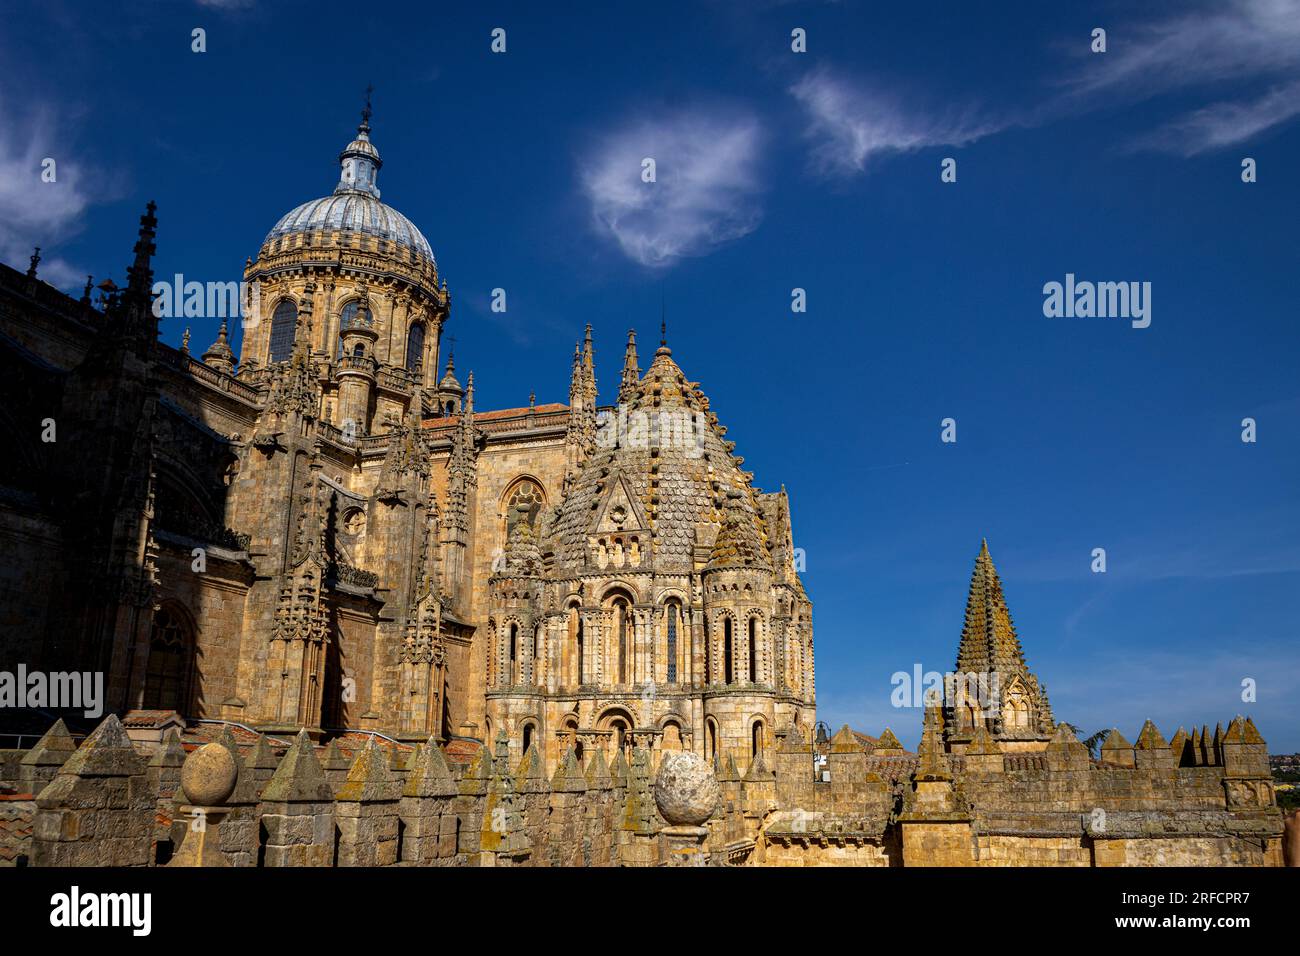 View of the two domes of the old and new cathedrals of Salamanca, Castilla y Leon, Spain Stock Photo